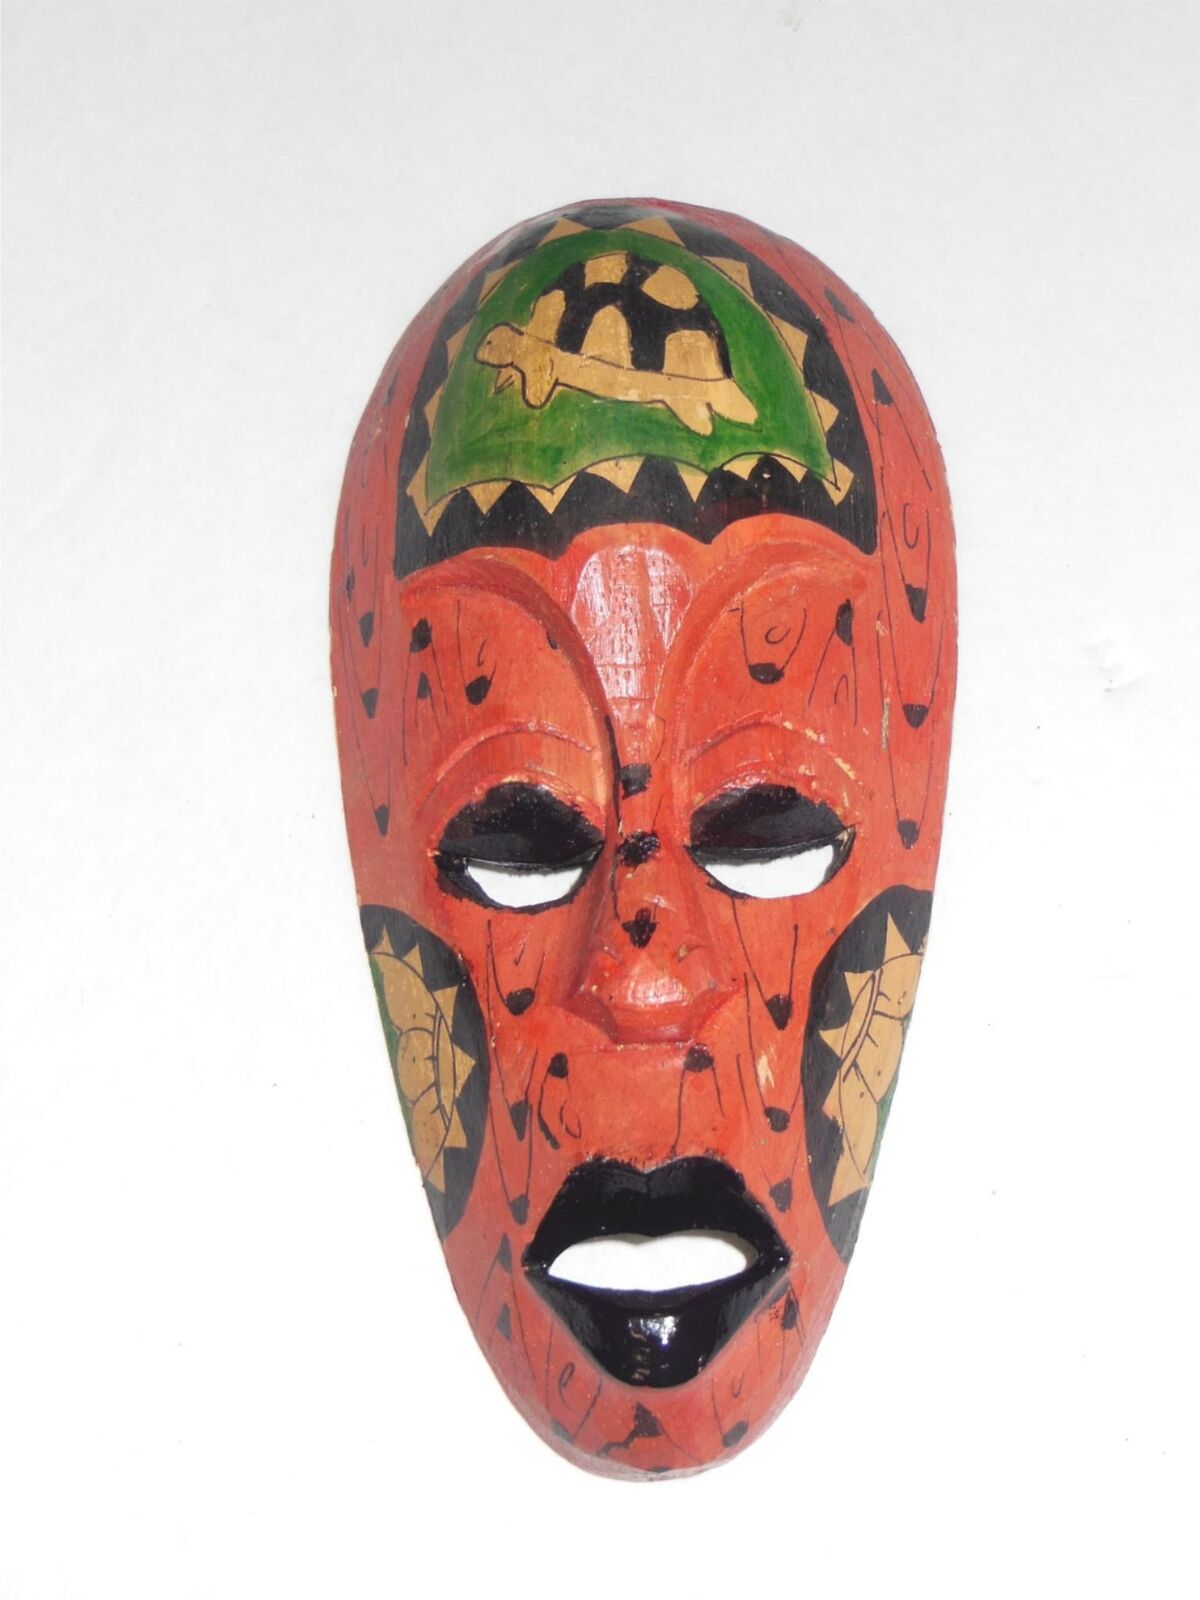 SMALL Max 79% OFF MASK HINDU CARNIVAL Popular products STYLE HANDMADE ART H CARVED WOOD WALL